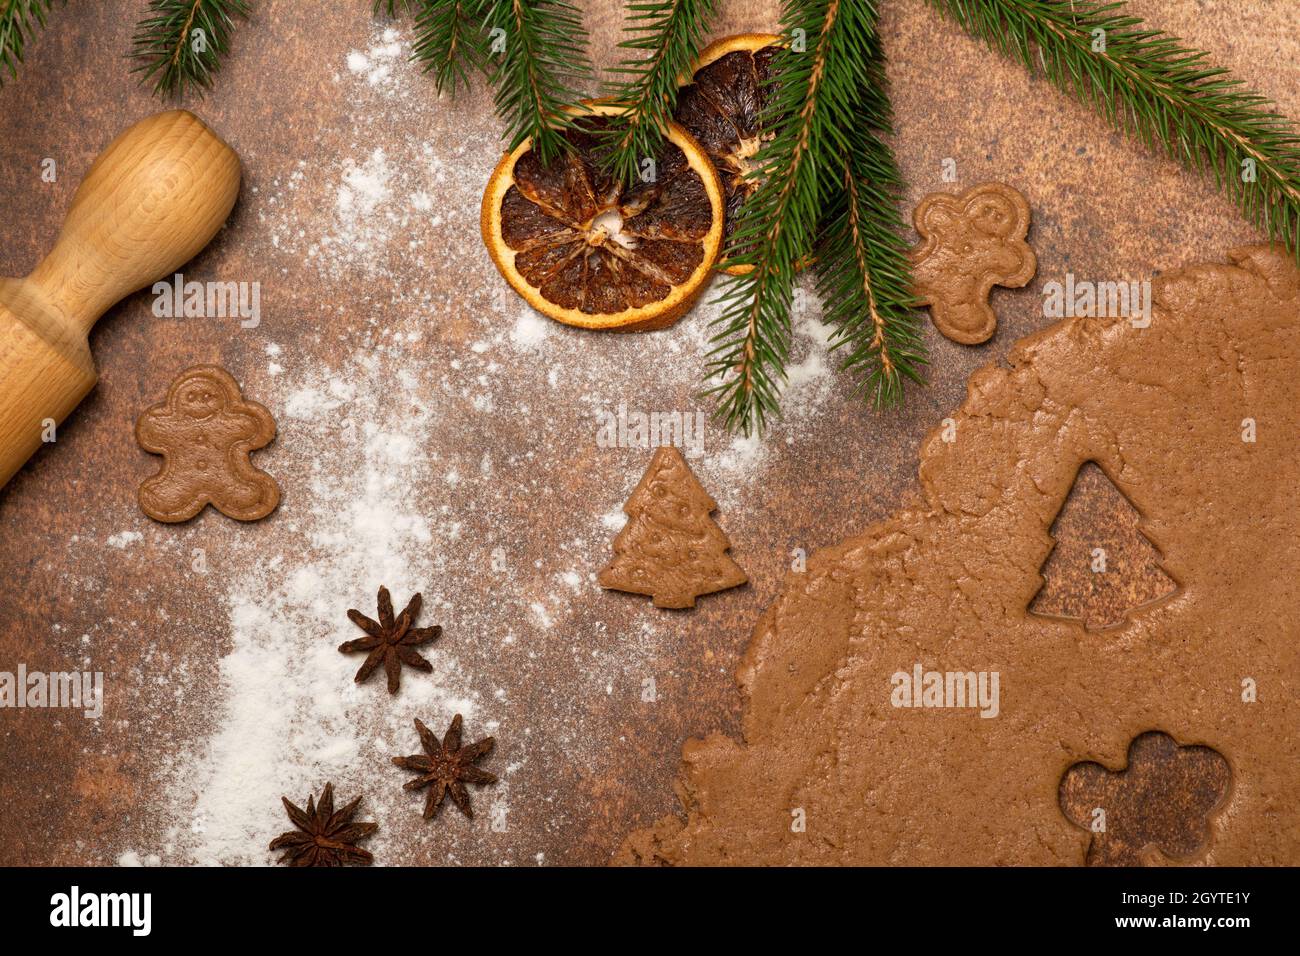 The kitchen worktop is sprinkled with flour. Gingerbread dough is rolled out with a rolling pin. Start making gingerbread cookies! Stock Photo